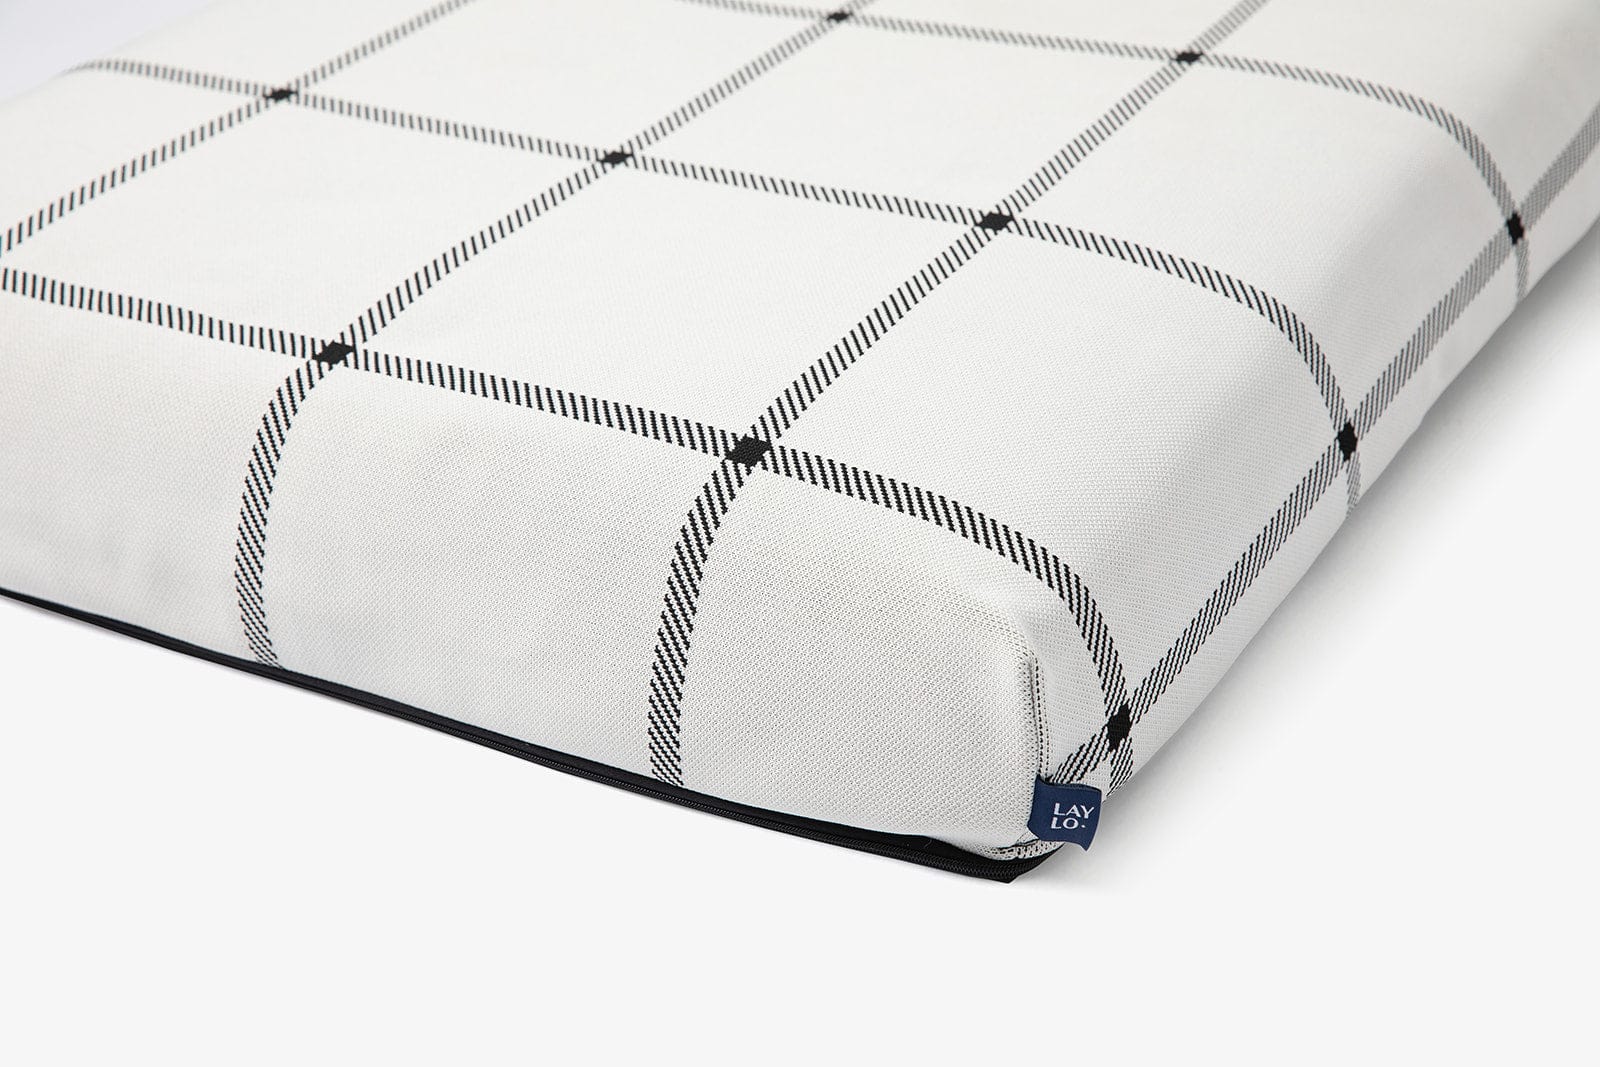 Laylo Pets LAY LO Pets - White Plaid Dog Bed or Bed Cover Lay Lo Pets